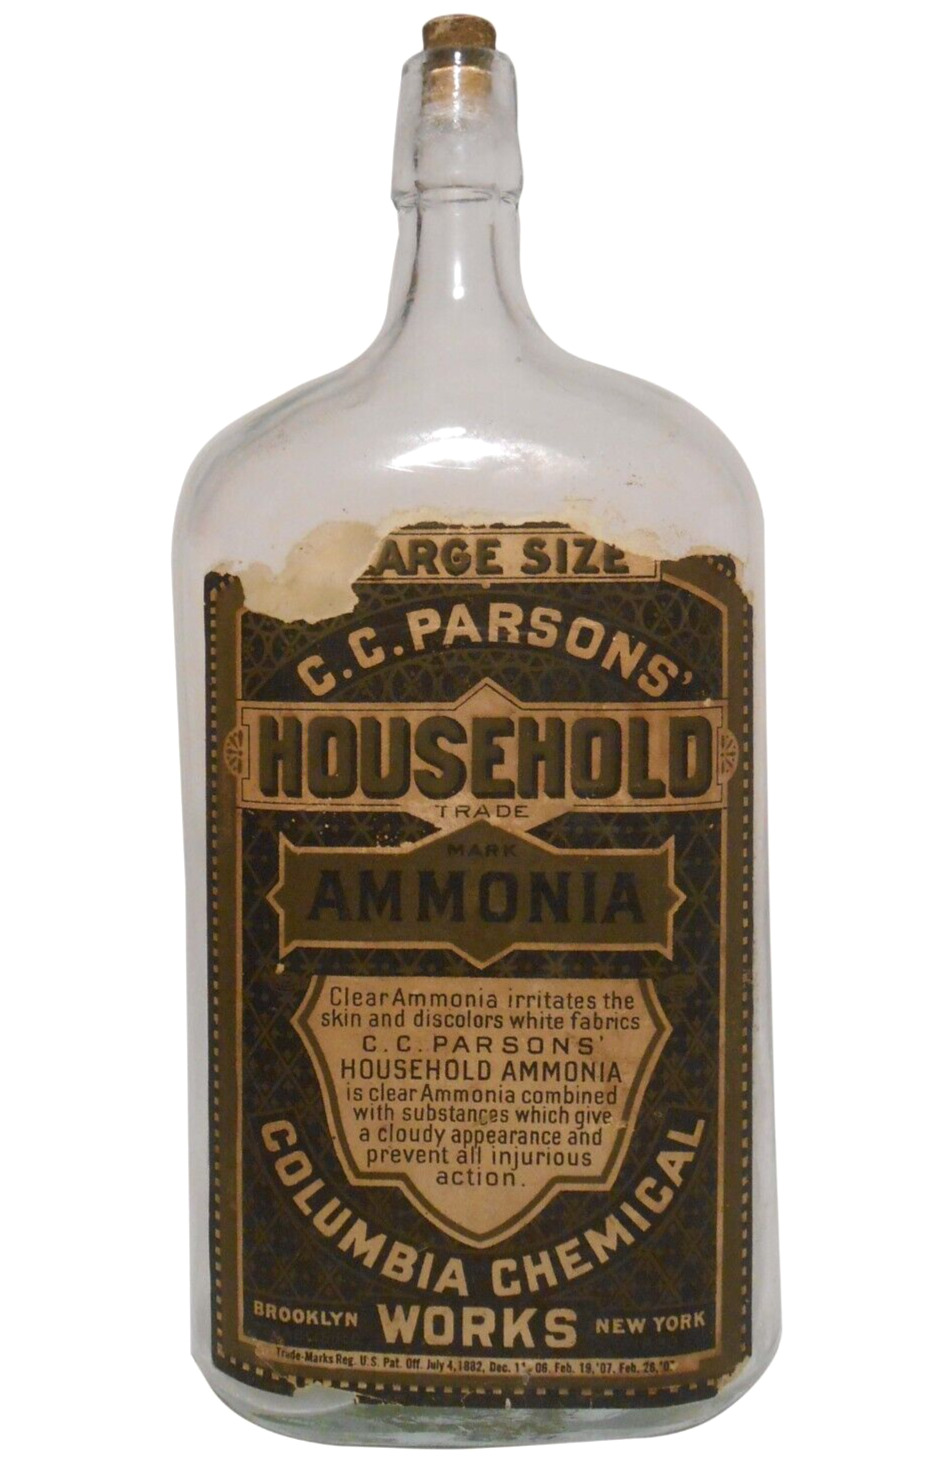 C C PARSONS HOUSEHOLD AMMONIA GLASS BOTTLE W/PAPER LABEL, COLUMBIA CHEM WORKS NY